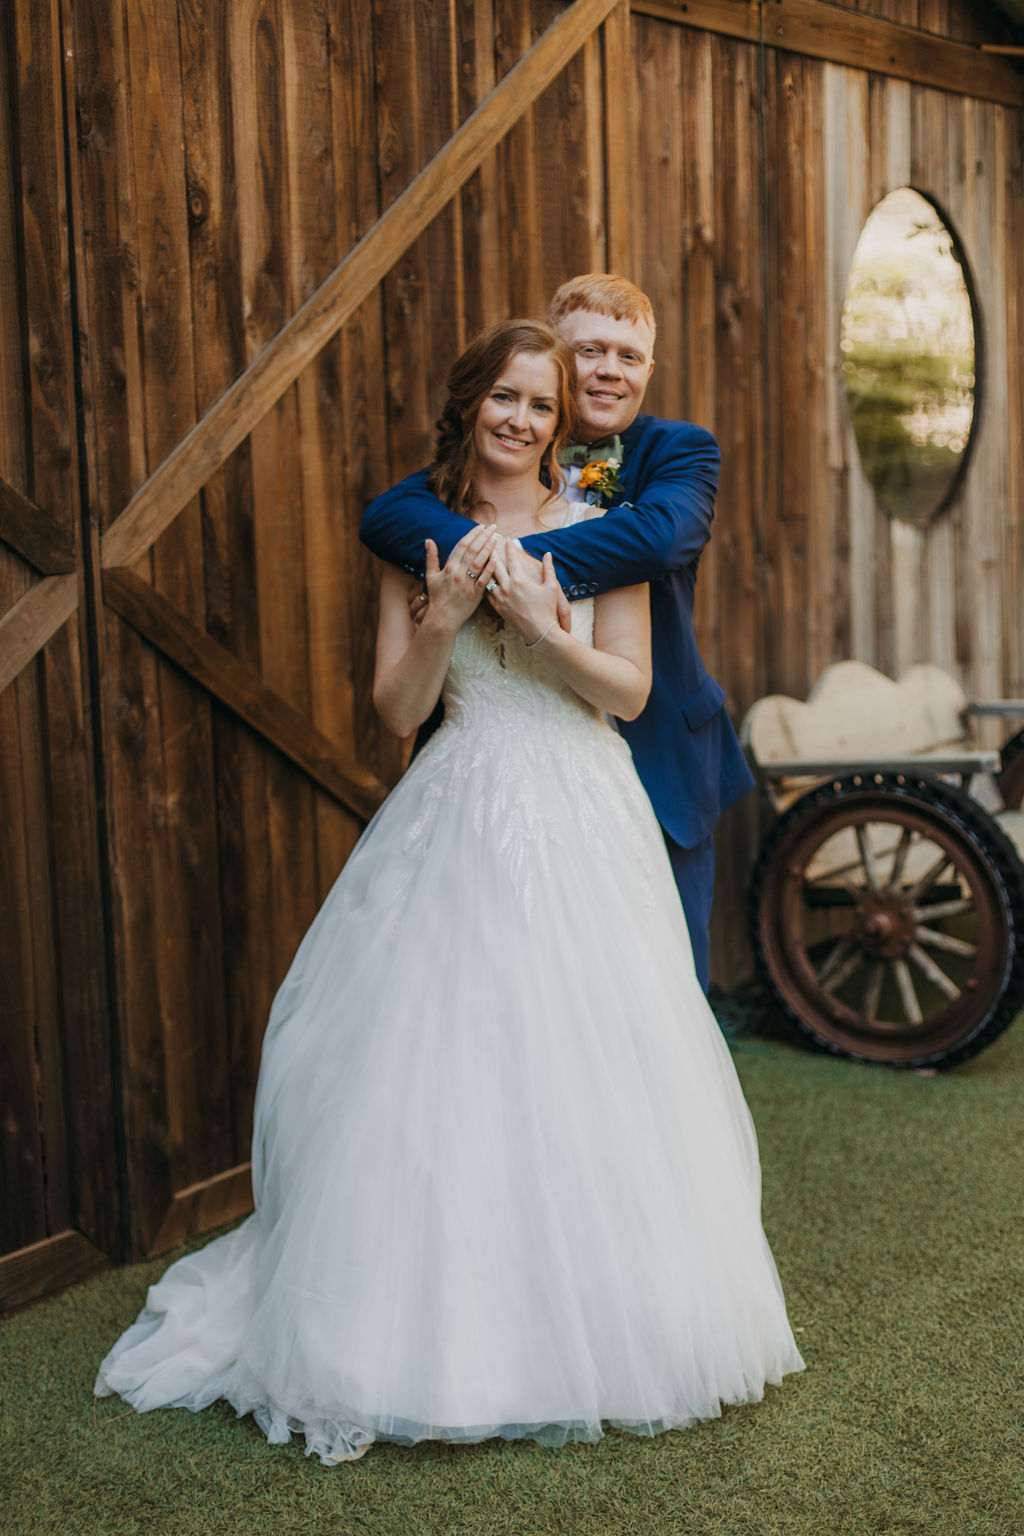 bride in v-neck embellished tulle ballgown wedding dress with groom groom in navy blue suit and green bowtie portrait shots at Calamigos Ranch